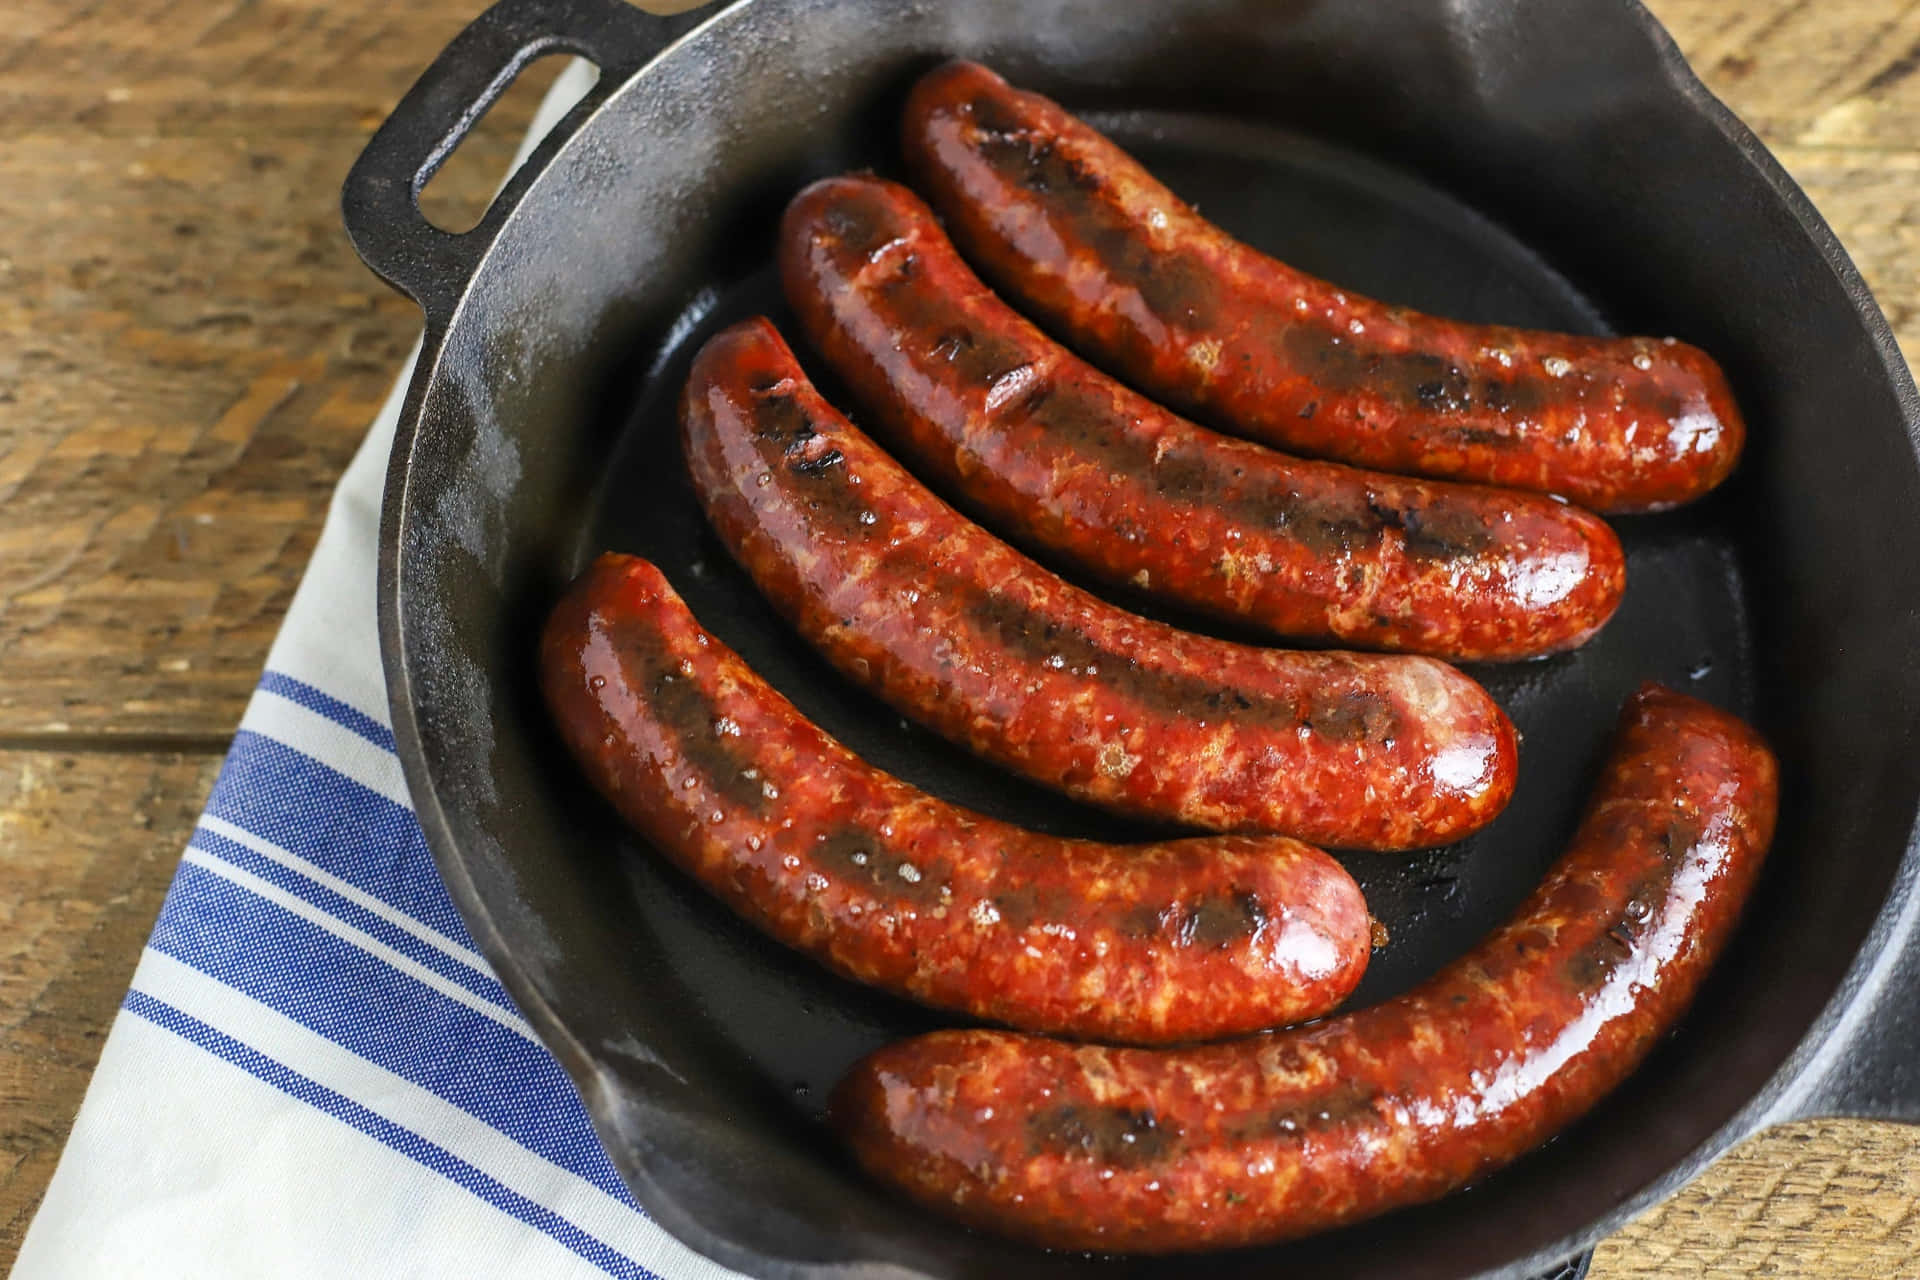 Sausages In A Skillet On A Wooden Table